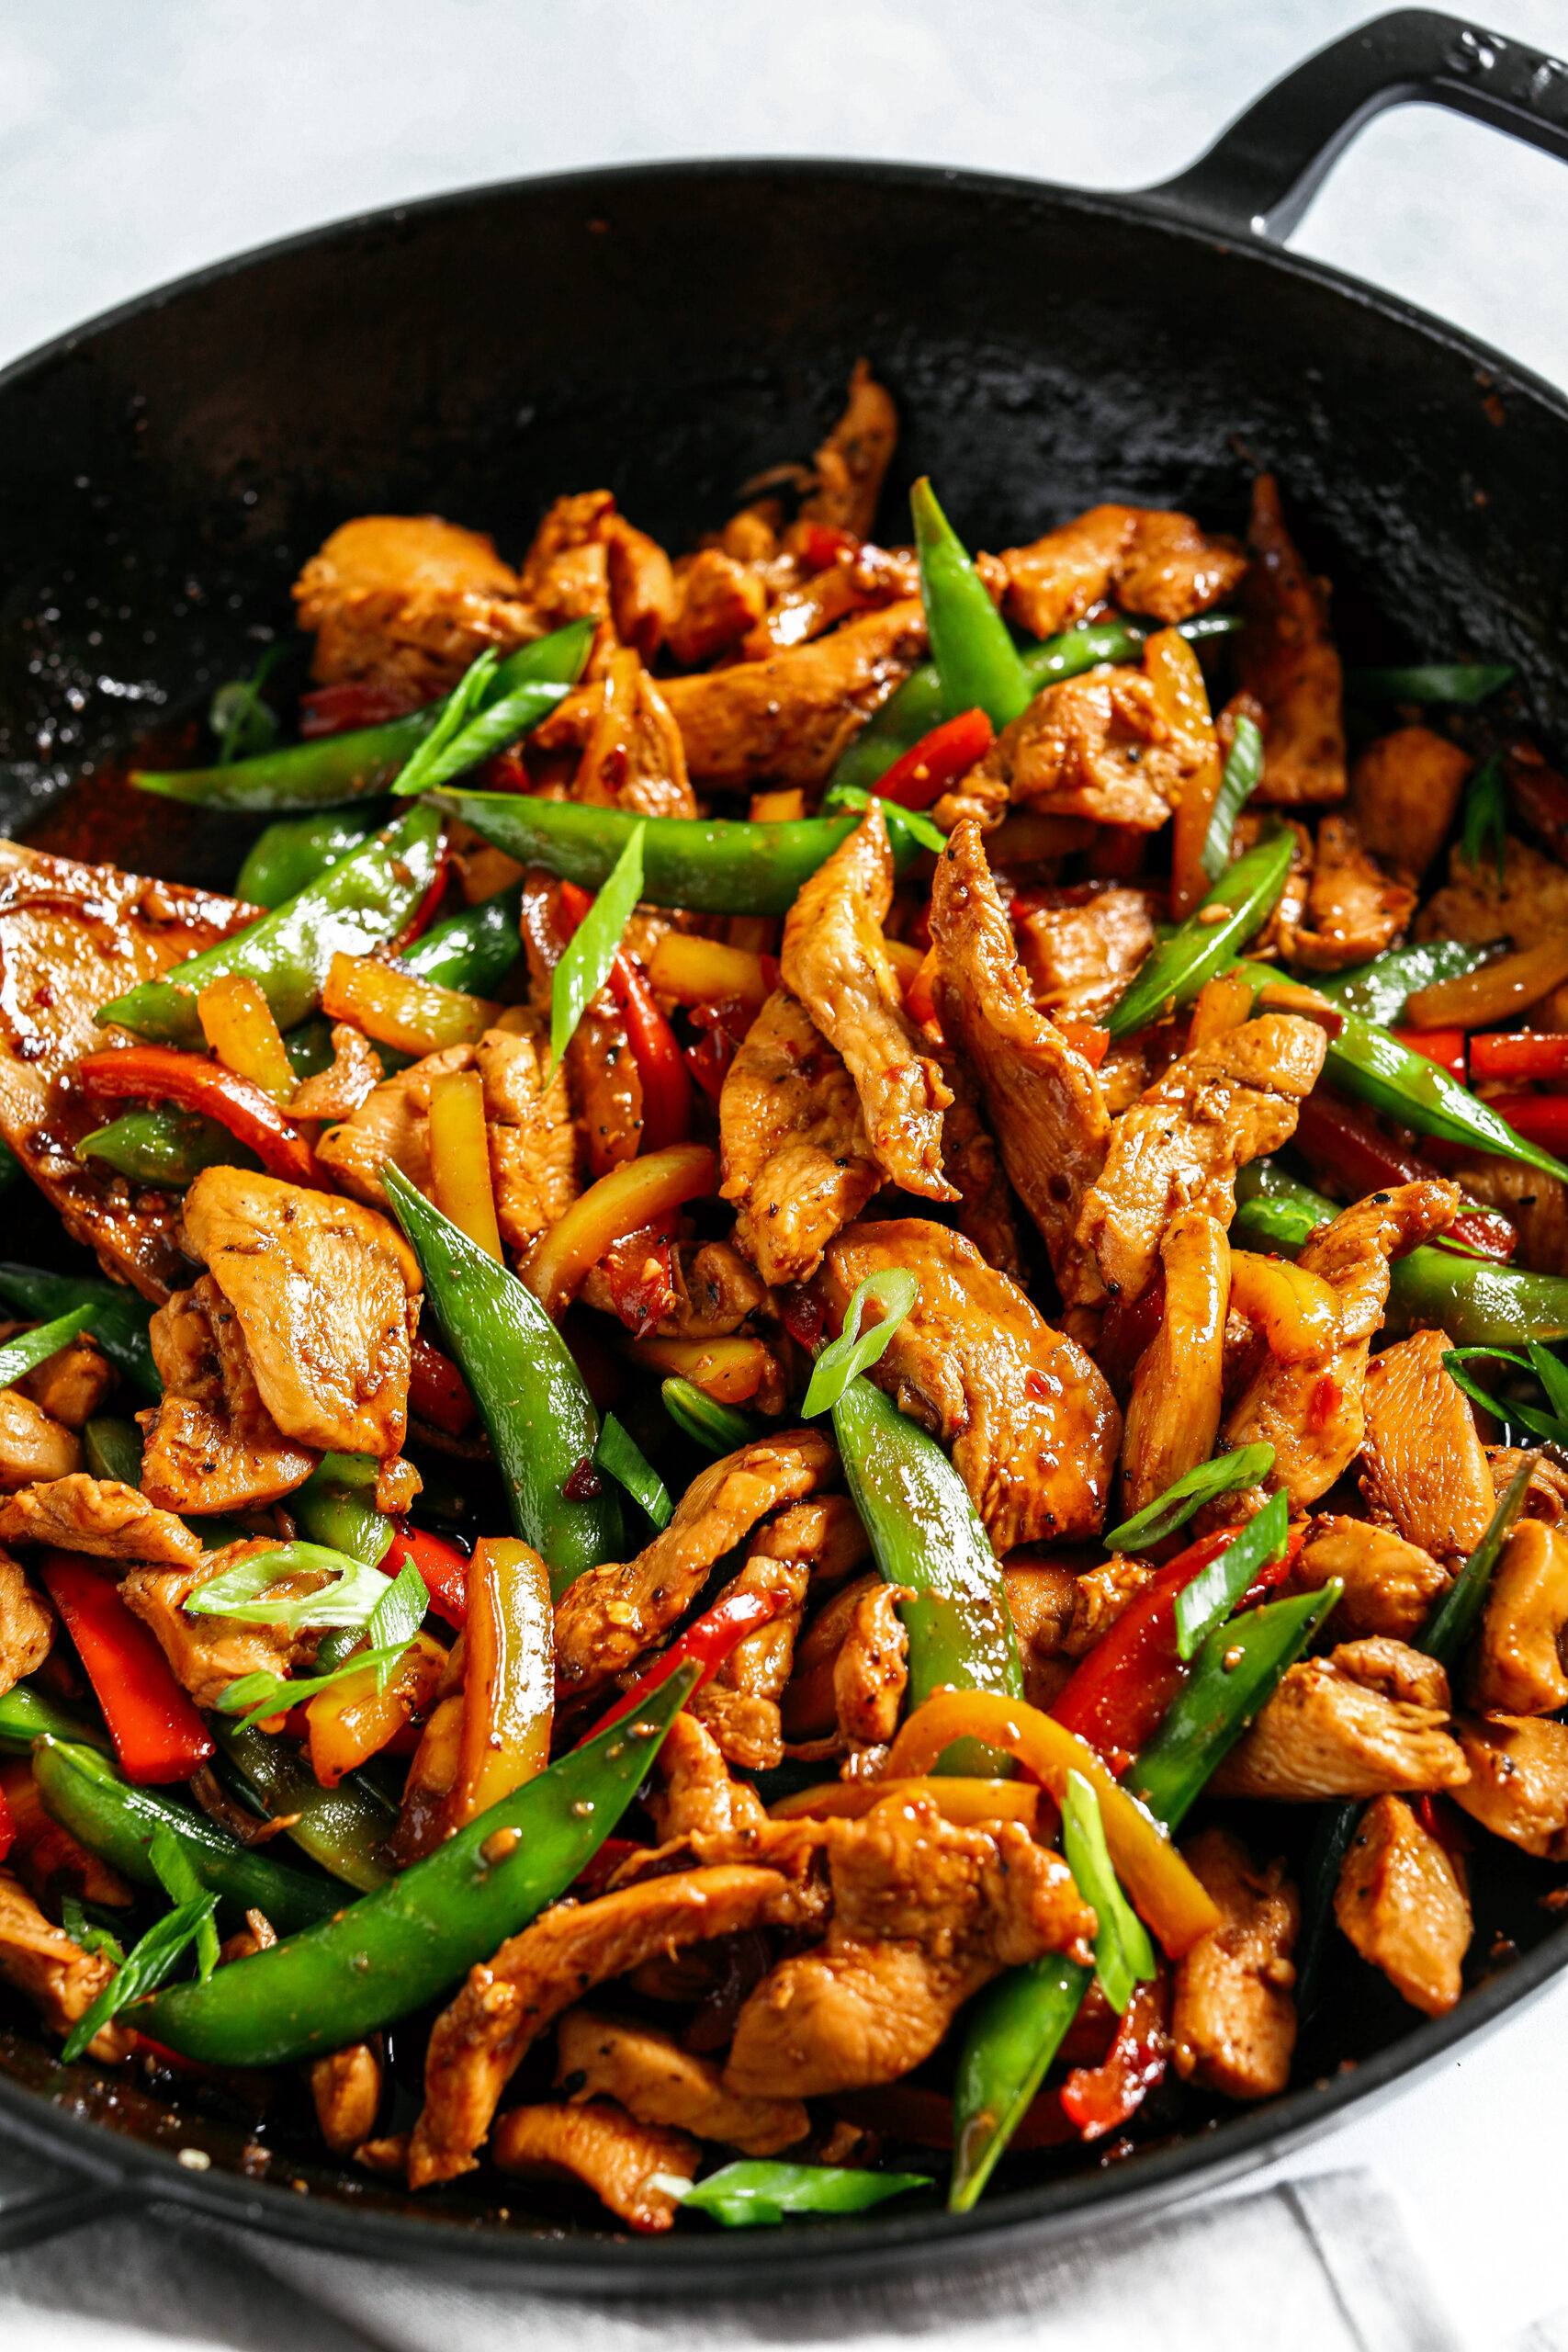 This sweet and spicy Firecracker Chicken Stir Fry is the perfect weeknight meal with tender, juicy chicken, crisp vegetables, all smothered in a delicious sauce that tastes way better than take-out!  Serve over rice and have dinner on your table in under 30 minutes! 